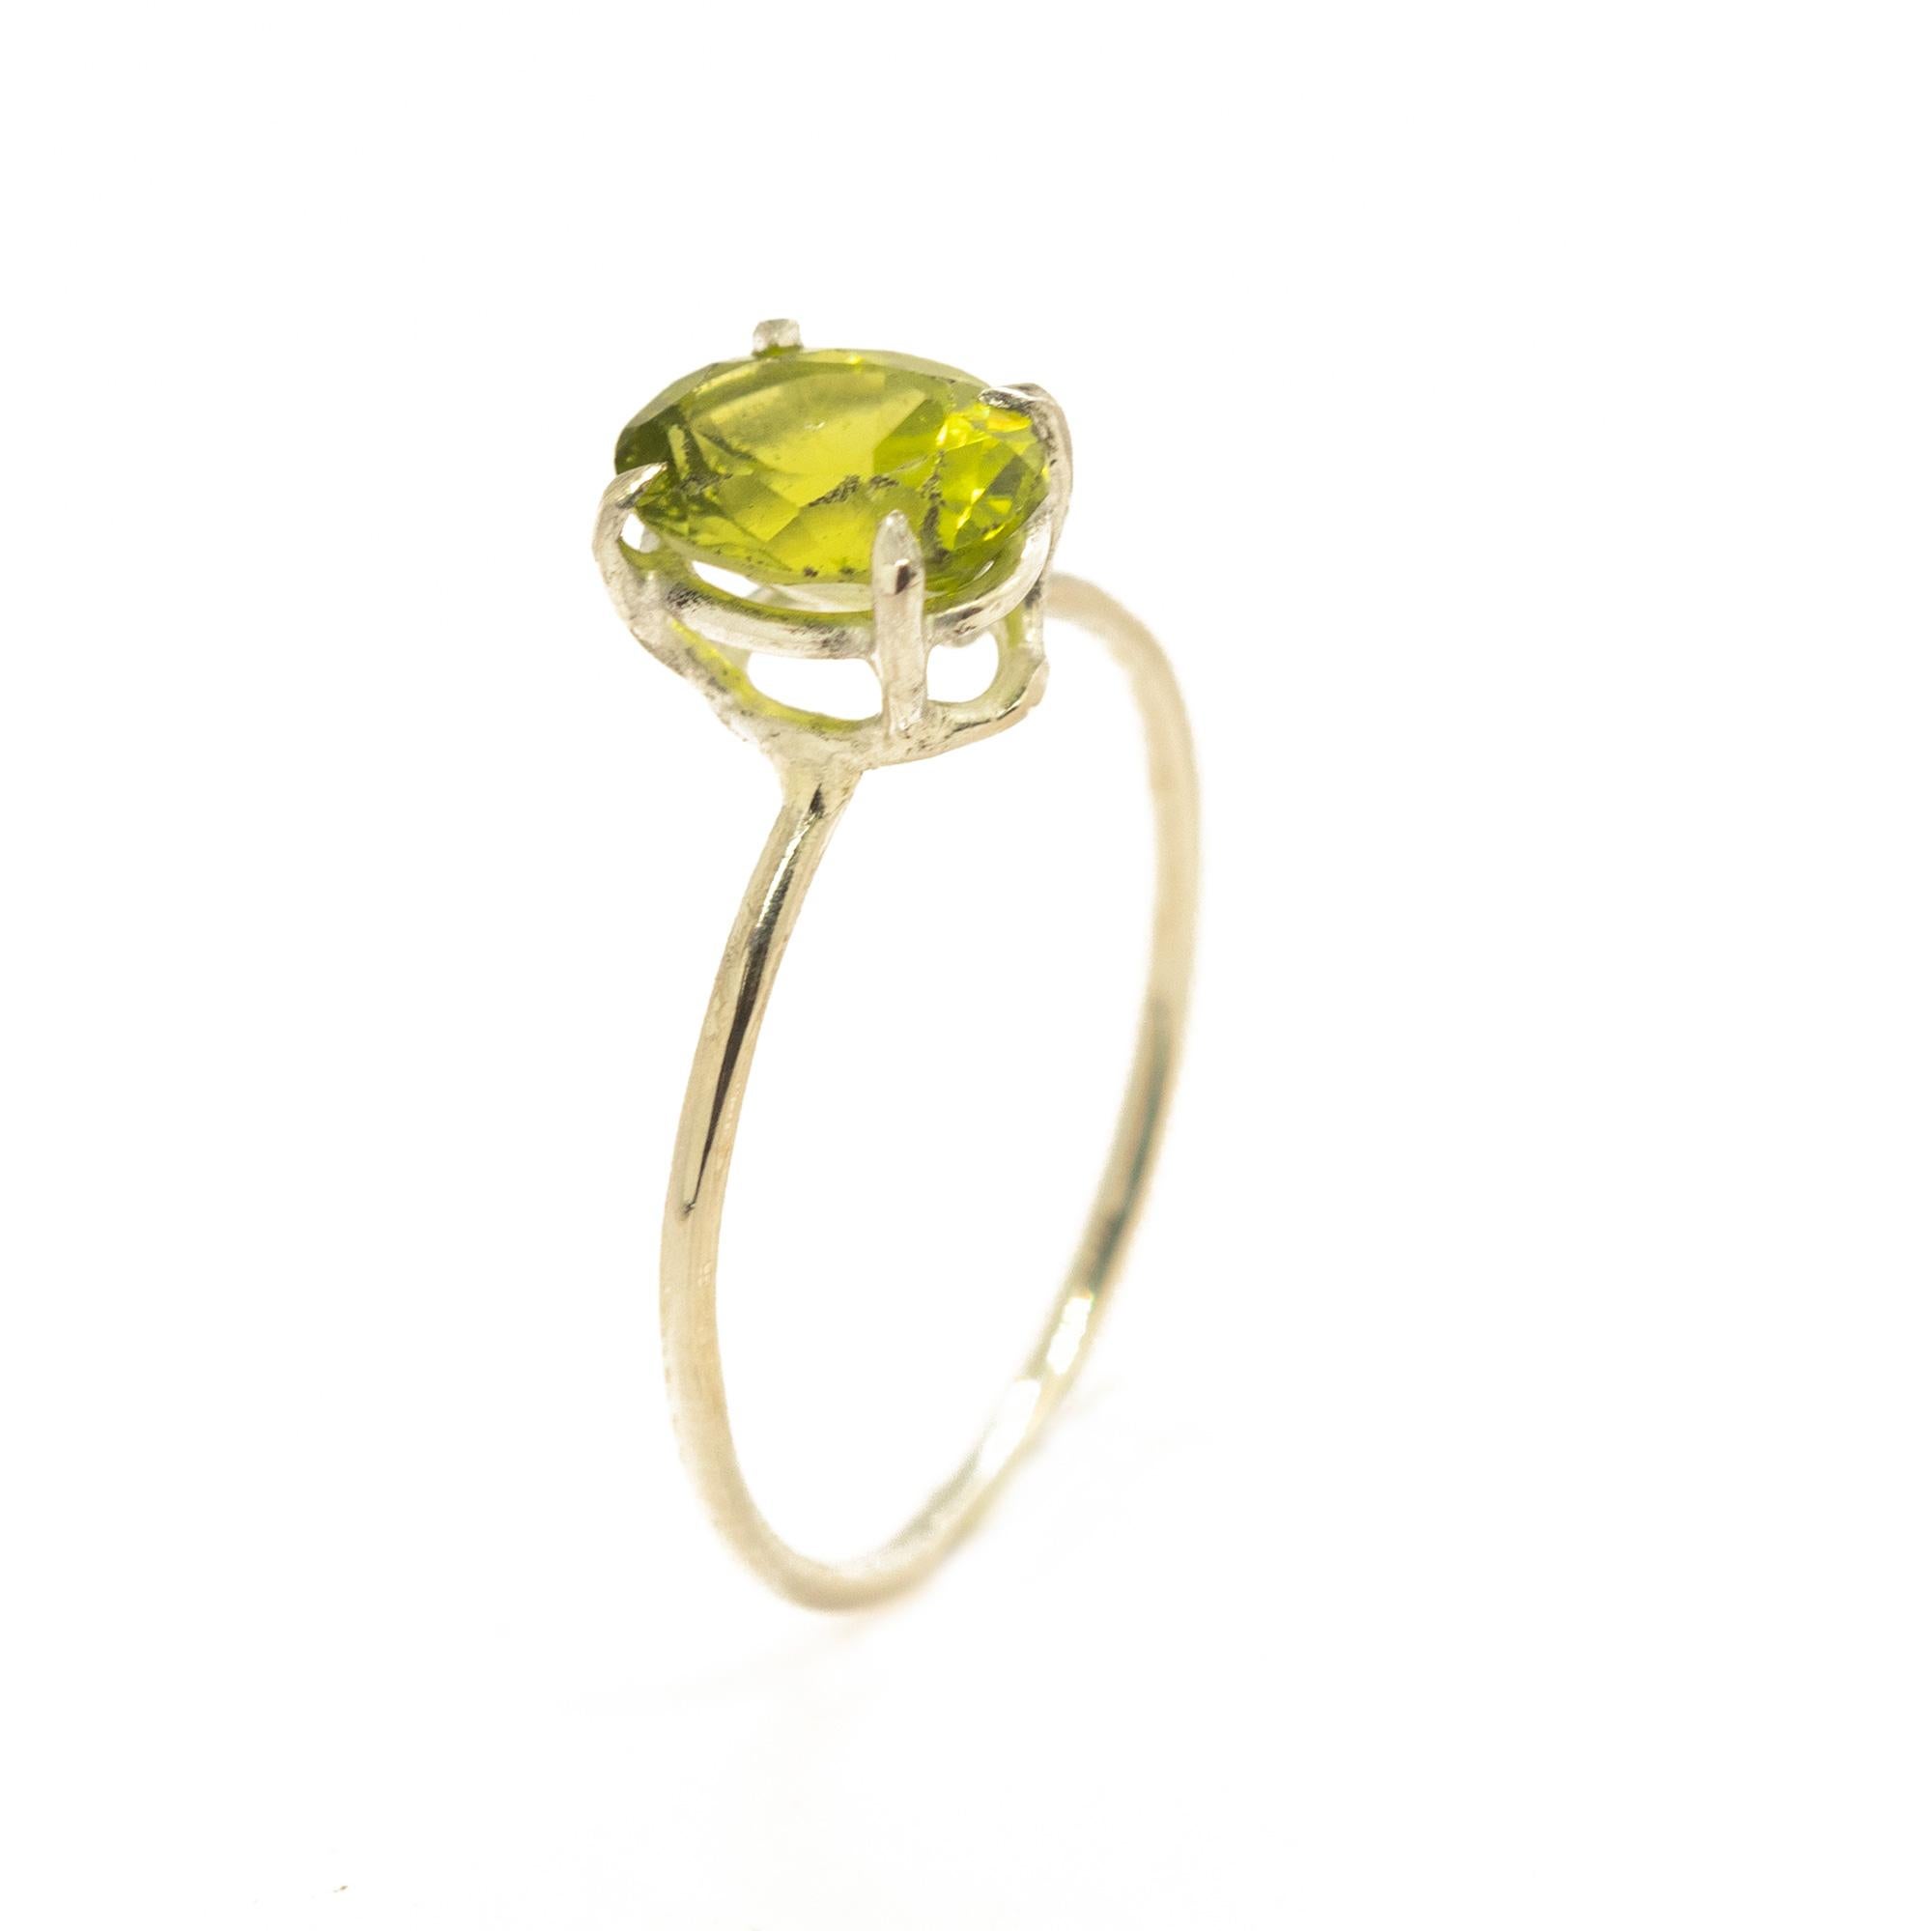 Signature INTINI Jewels Peridot jewellery. Modern and elegant ring design in Sterling Silver for a everyday use.

• Sterling Silver 925
• Green Peridot, faceted oval cut, 8x6 mm, 1.5 carats
• Total Weight 0.9 g
• Size 6 (US), 12 (IT), 52 (FR). Size